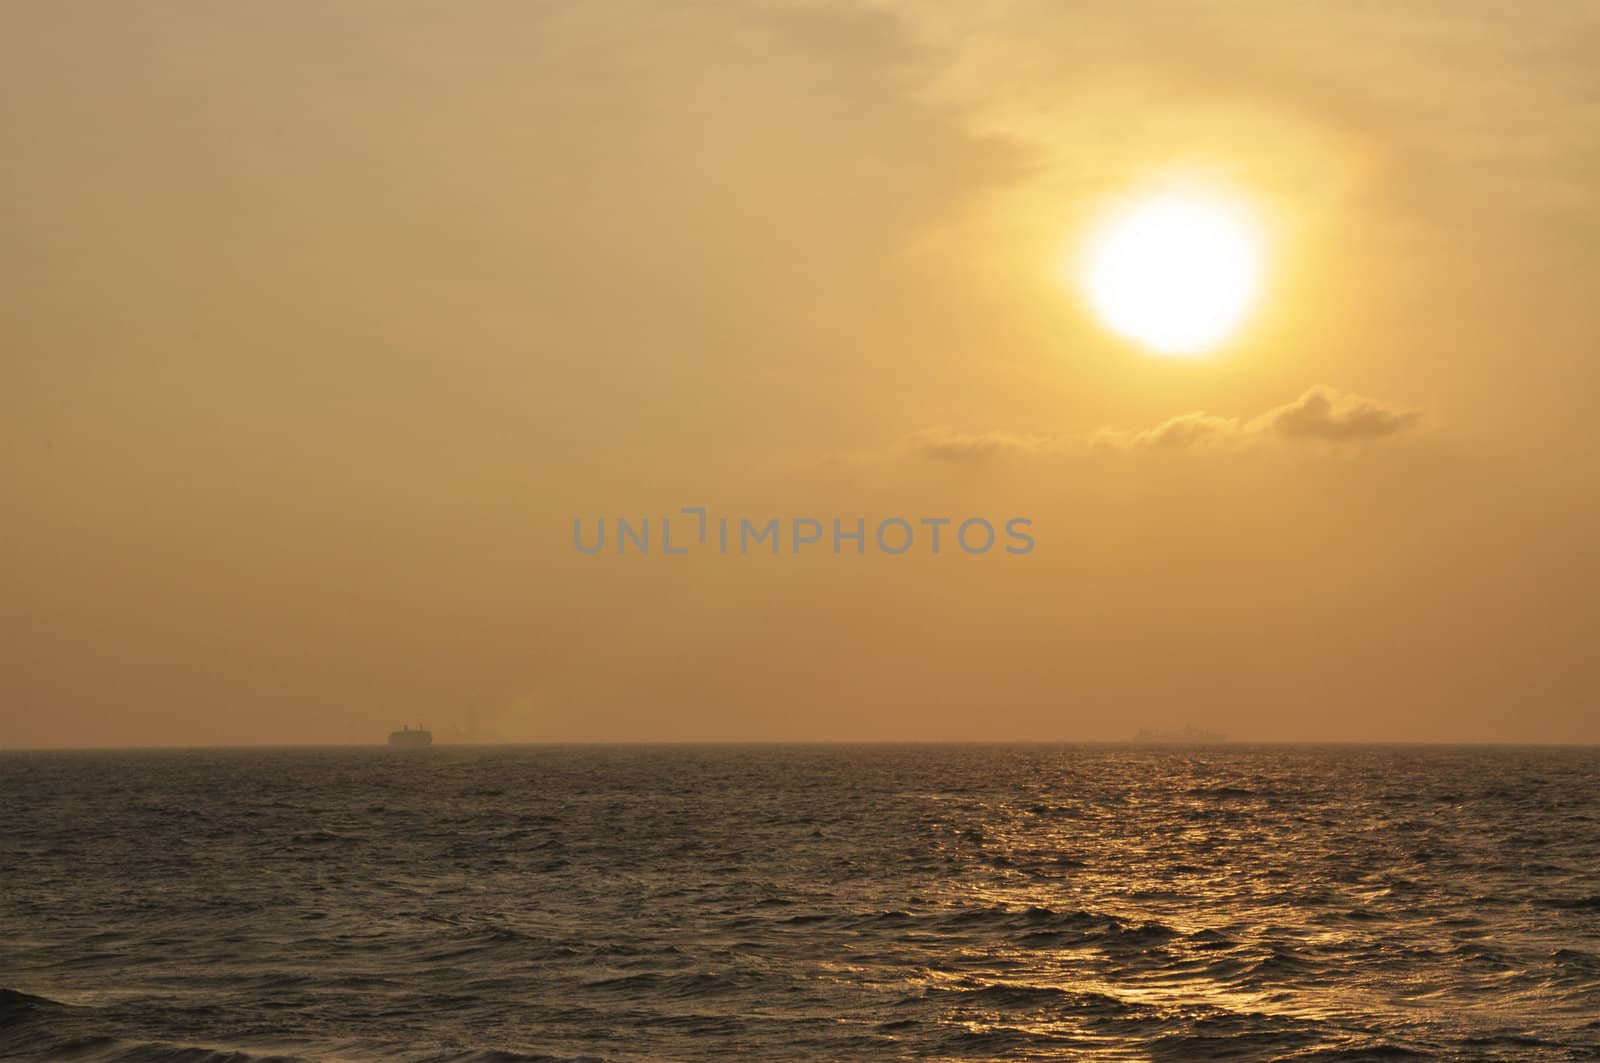 Sunset at the ocean in Sri Lanka by kdreams02